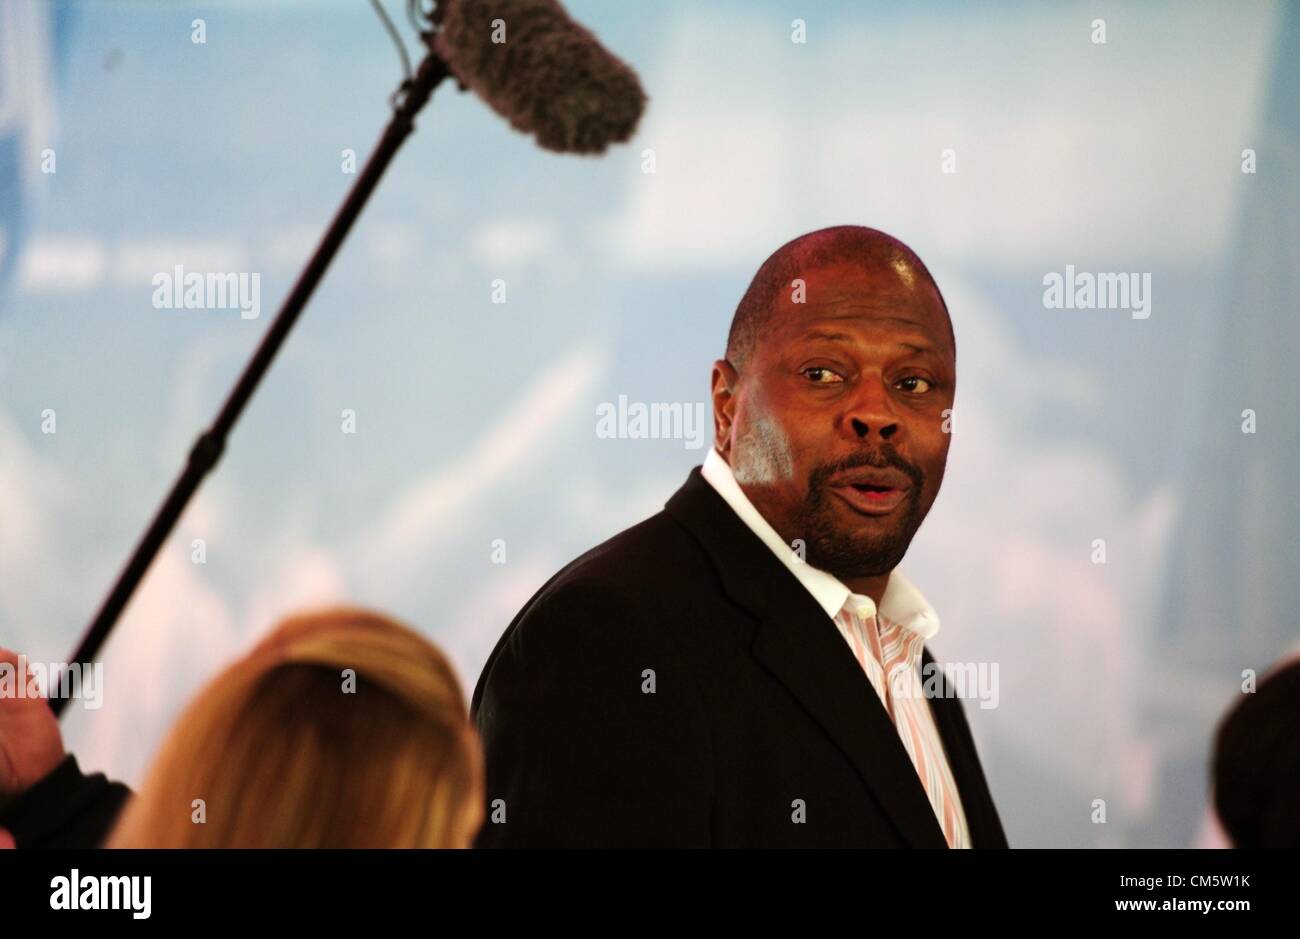 Patrick Ewing competing for the NBA New York Knicks Stock Photo - Alamy